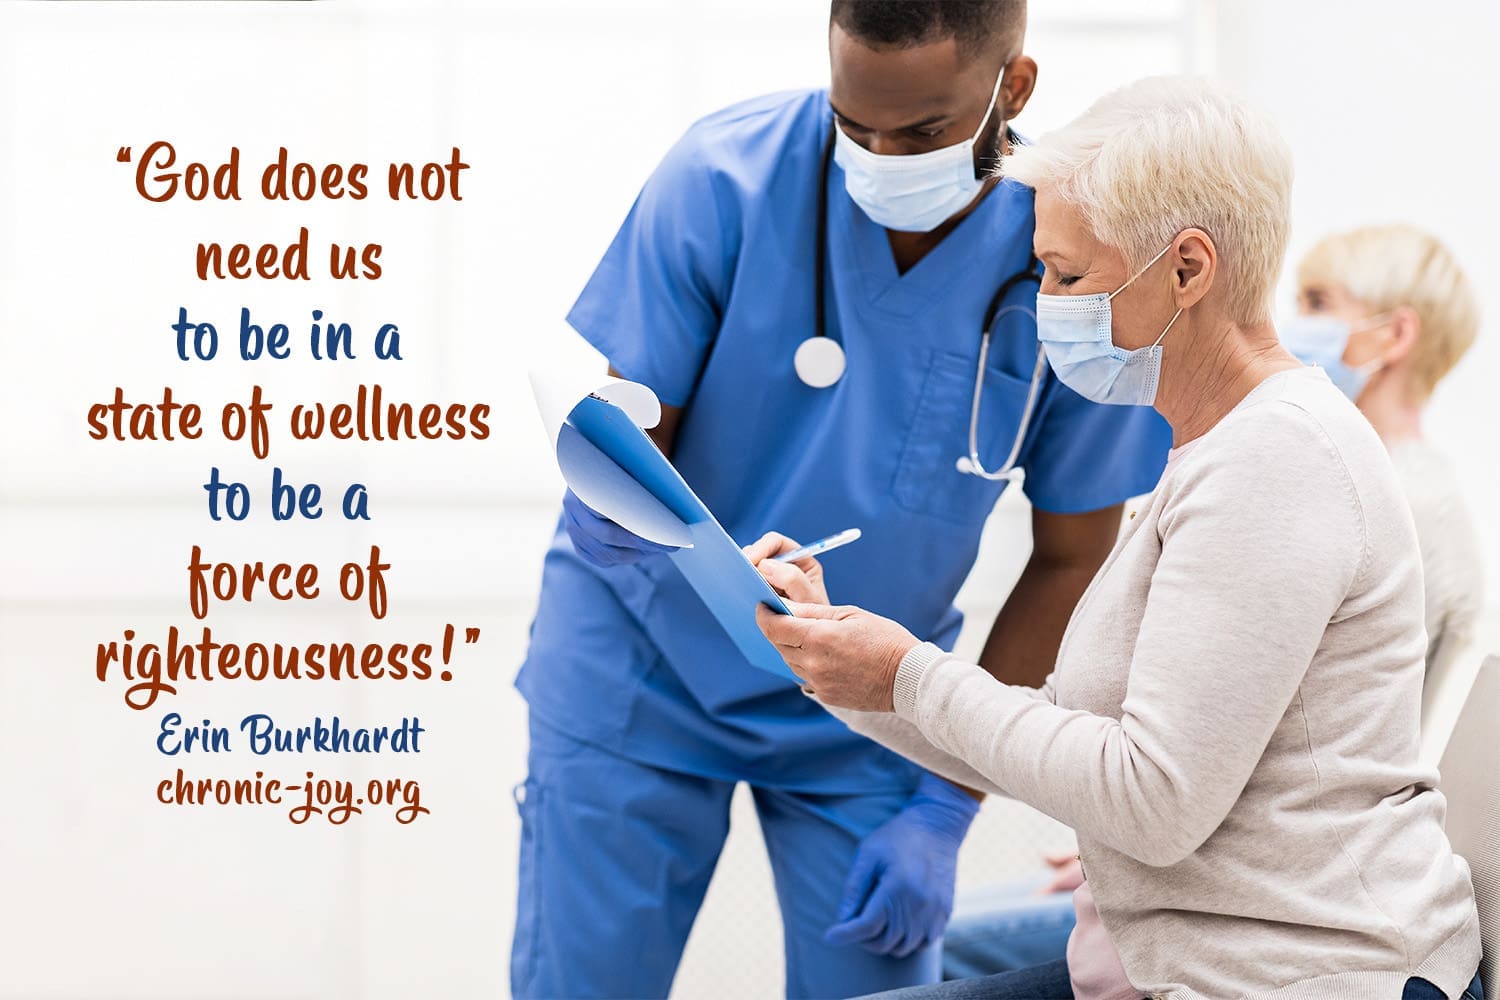 "God does not need us to be in a state of wellness to be a force of righteousness!" Erin Burkhardt